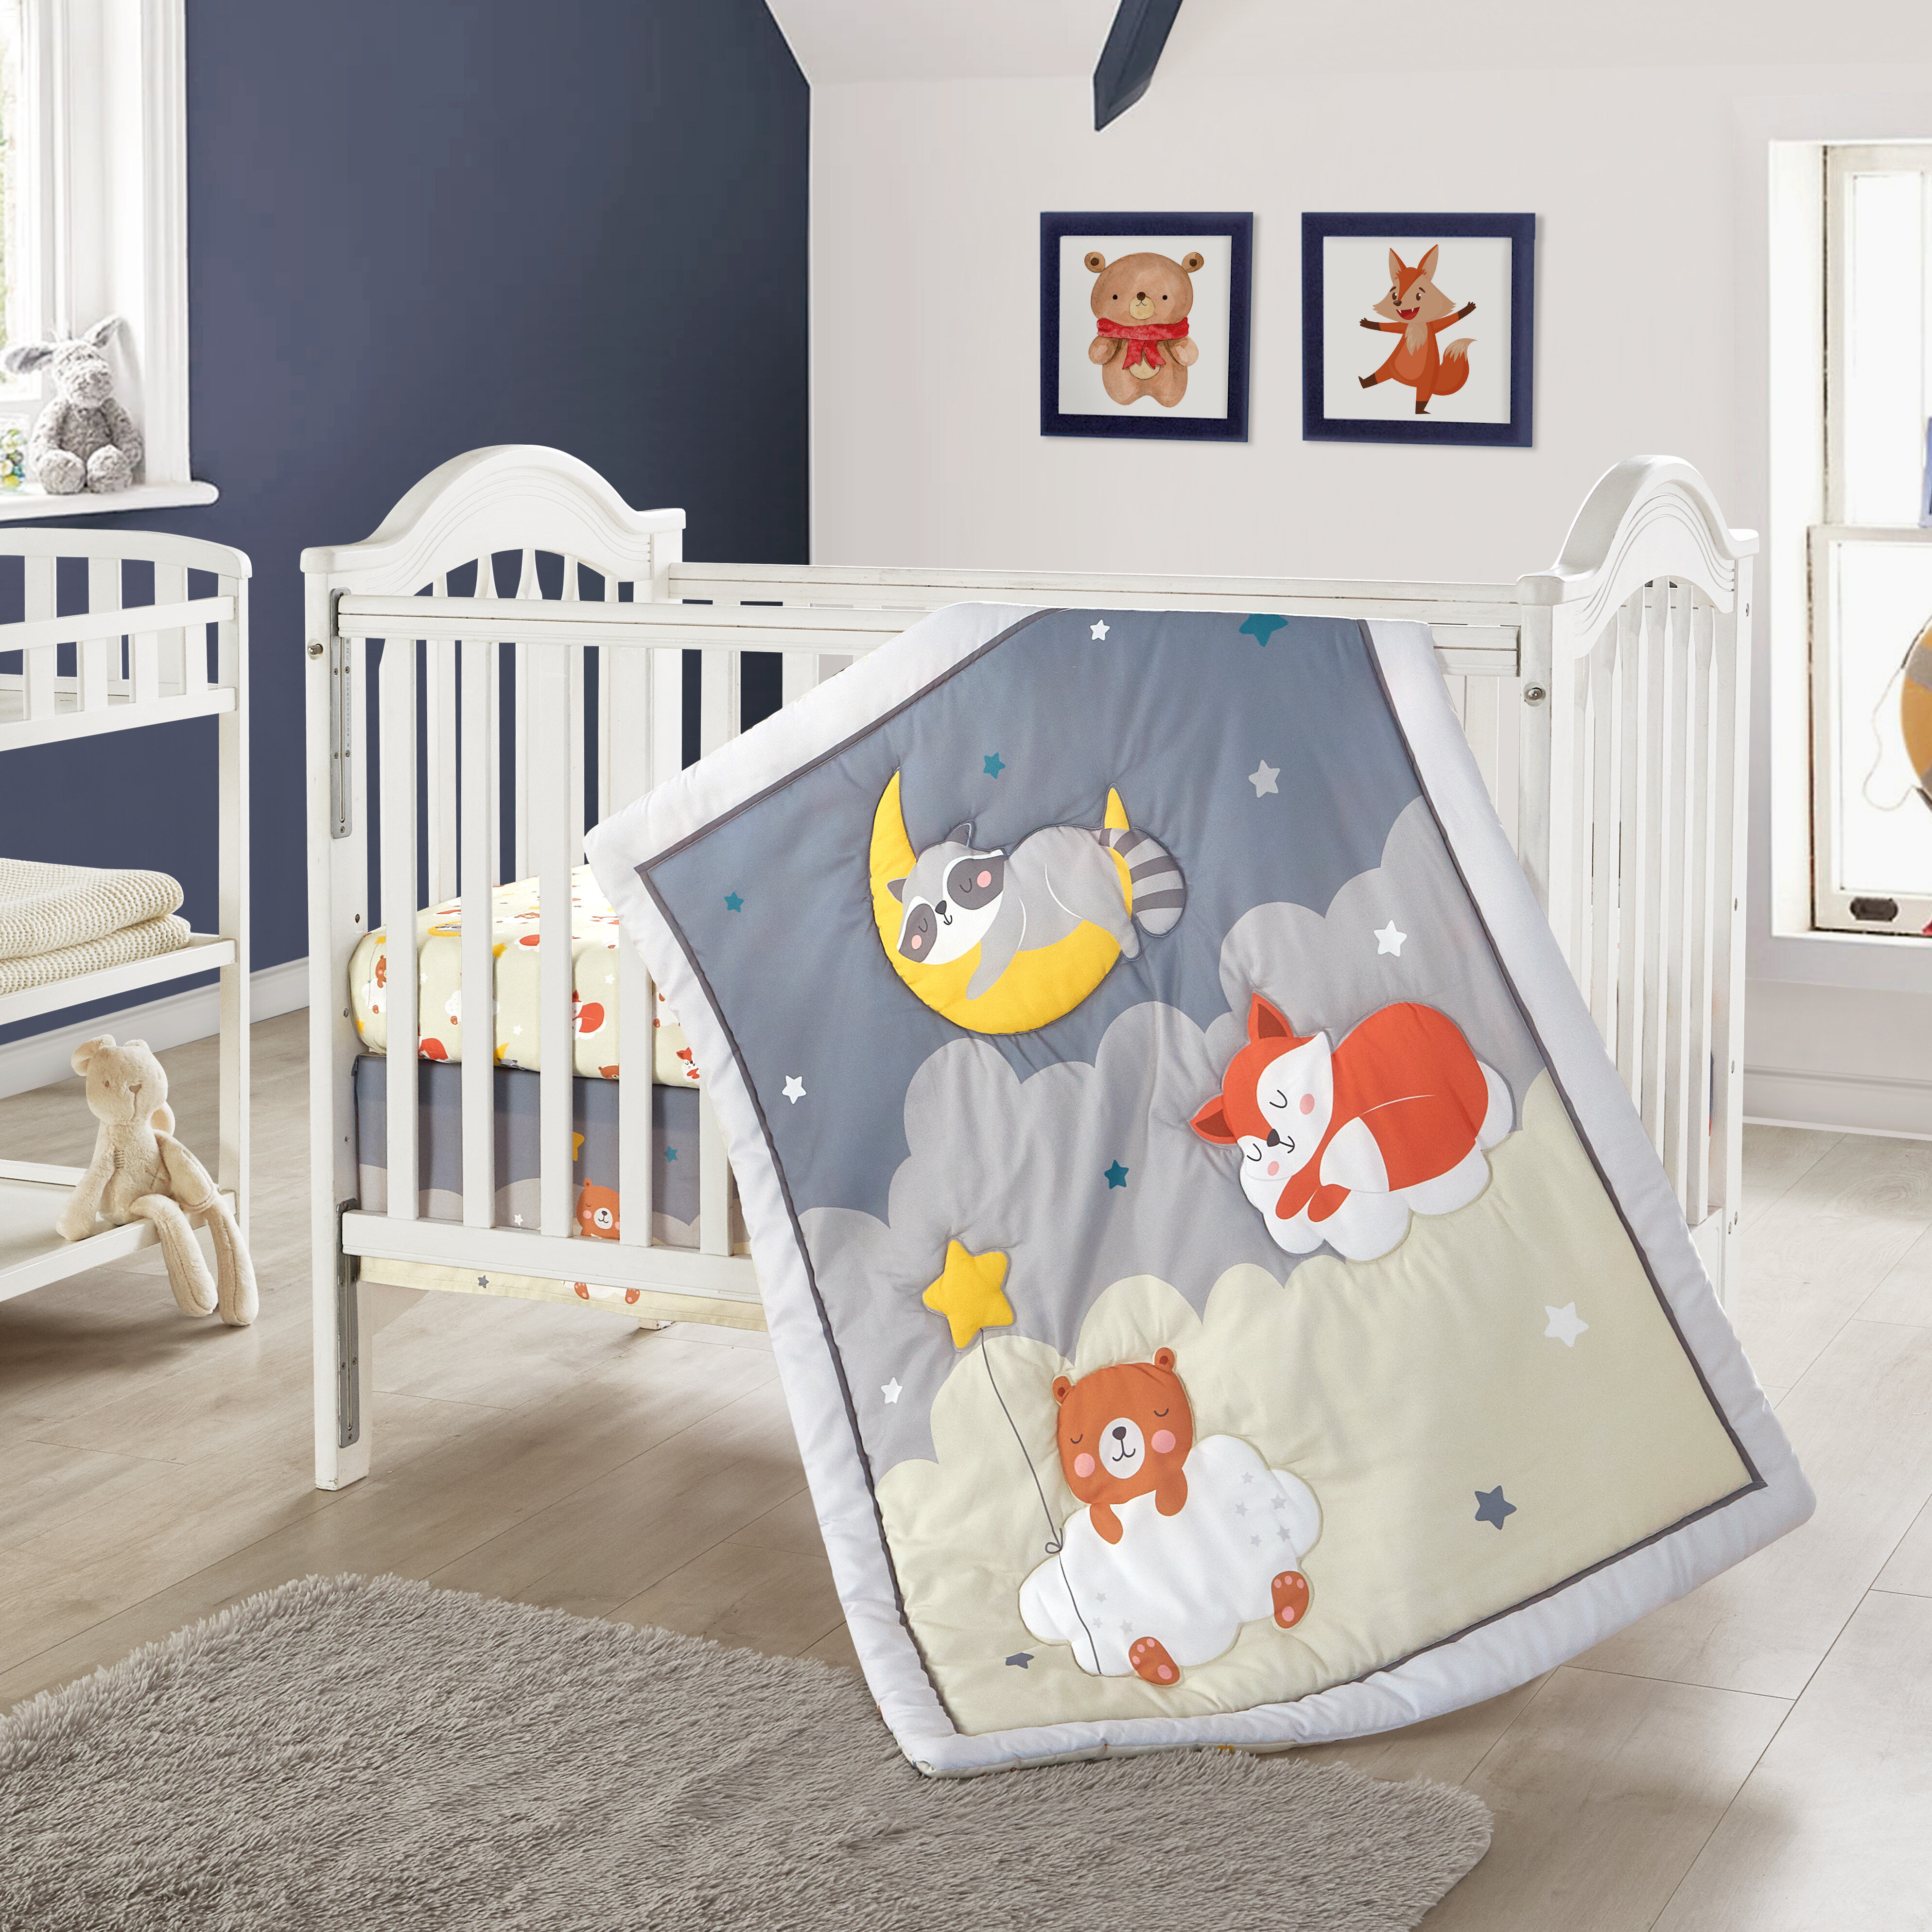 Mickey Mouse Crib Baby bedding cribs for babies cot bumper bed around piece set 